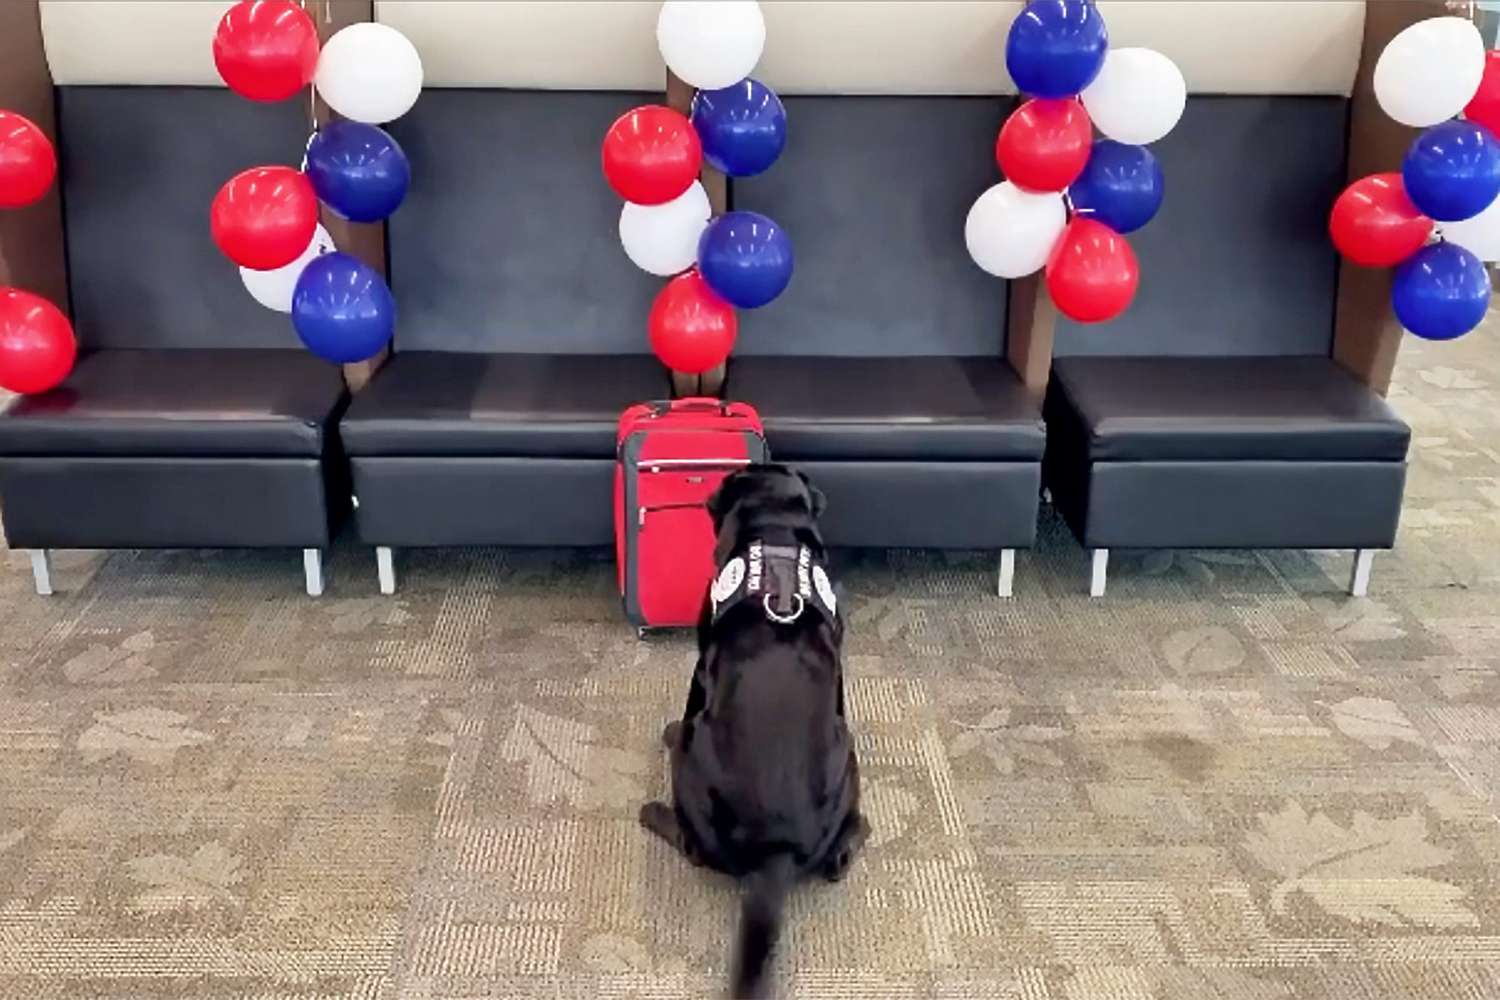 black lab searching luggage before a big surprise